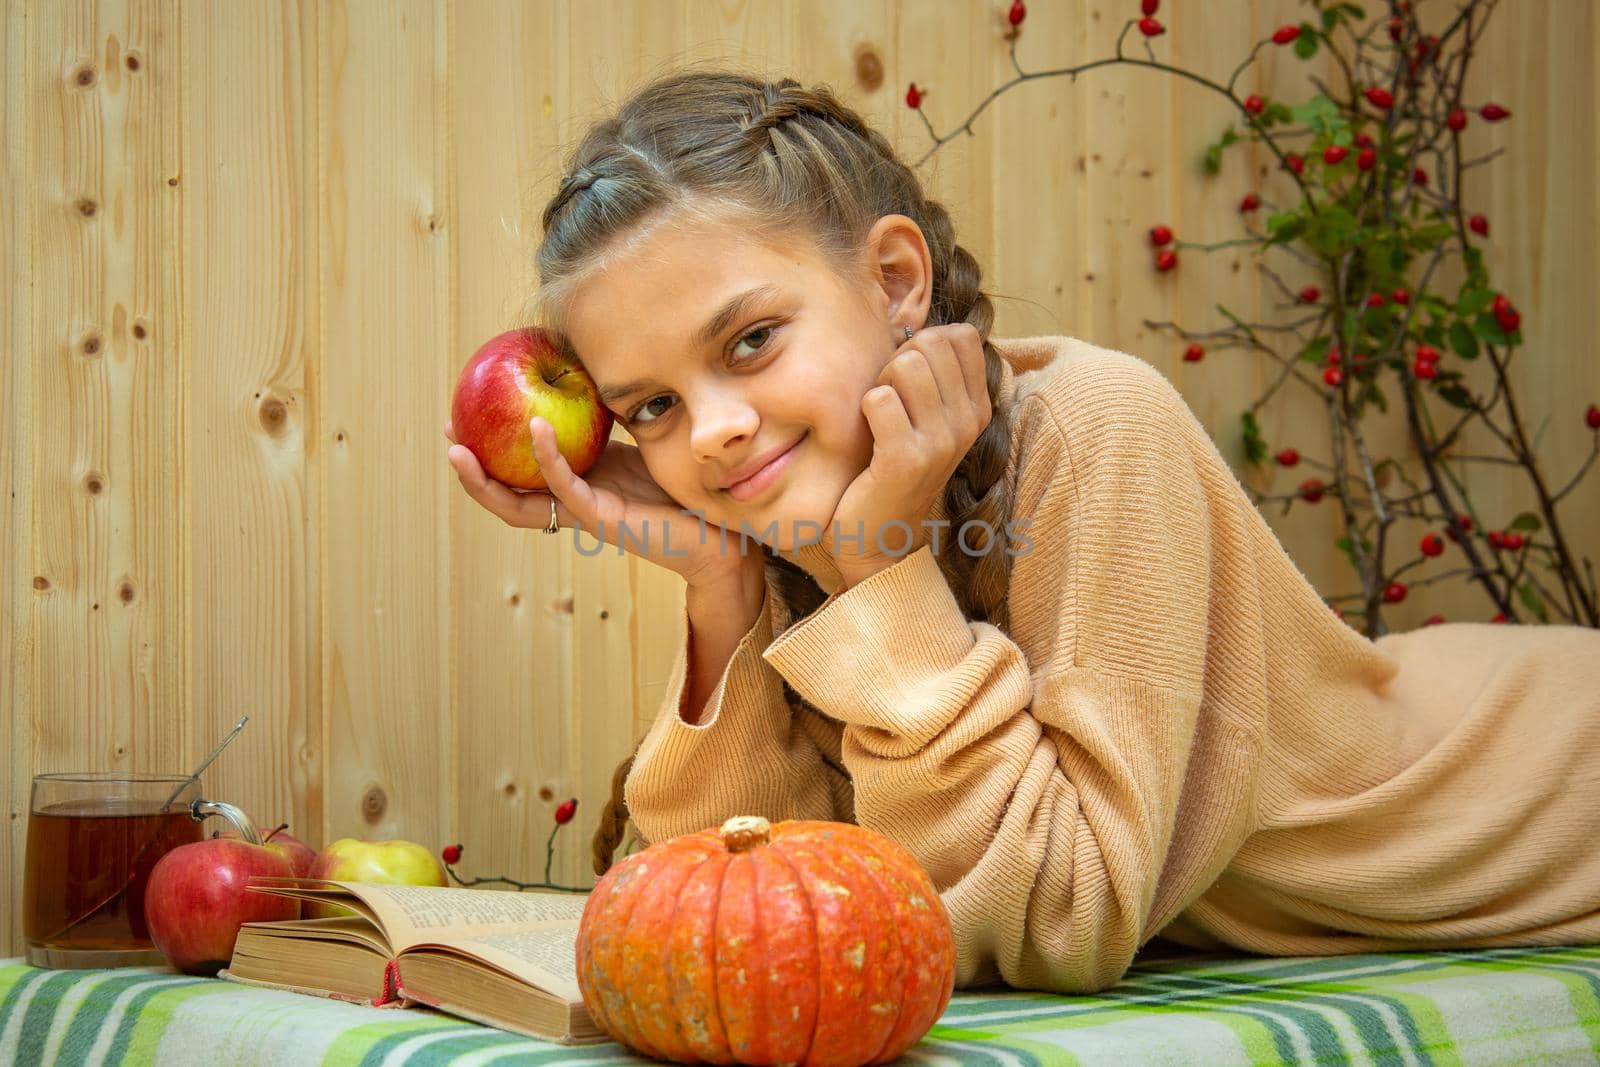 A girl lying down reads a book, a pumpkin and apples lie nearby, a girl joyfully looks into the frame by Madhourse